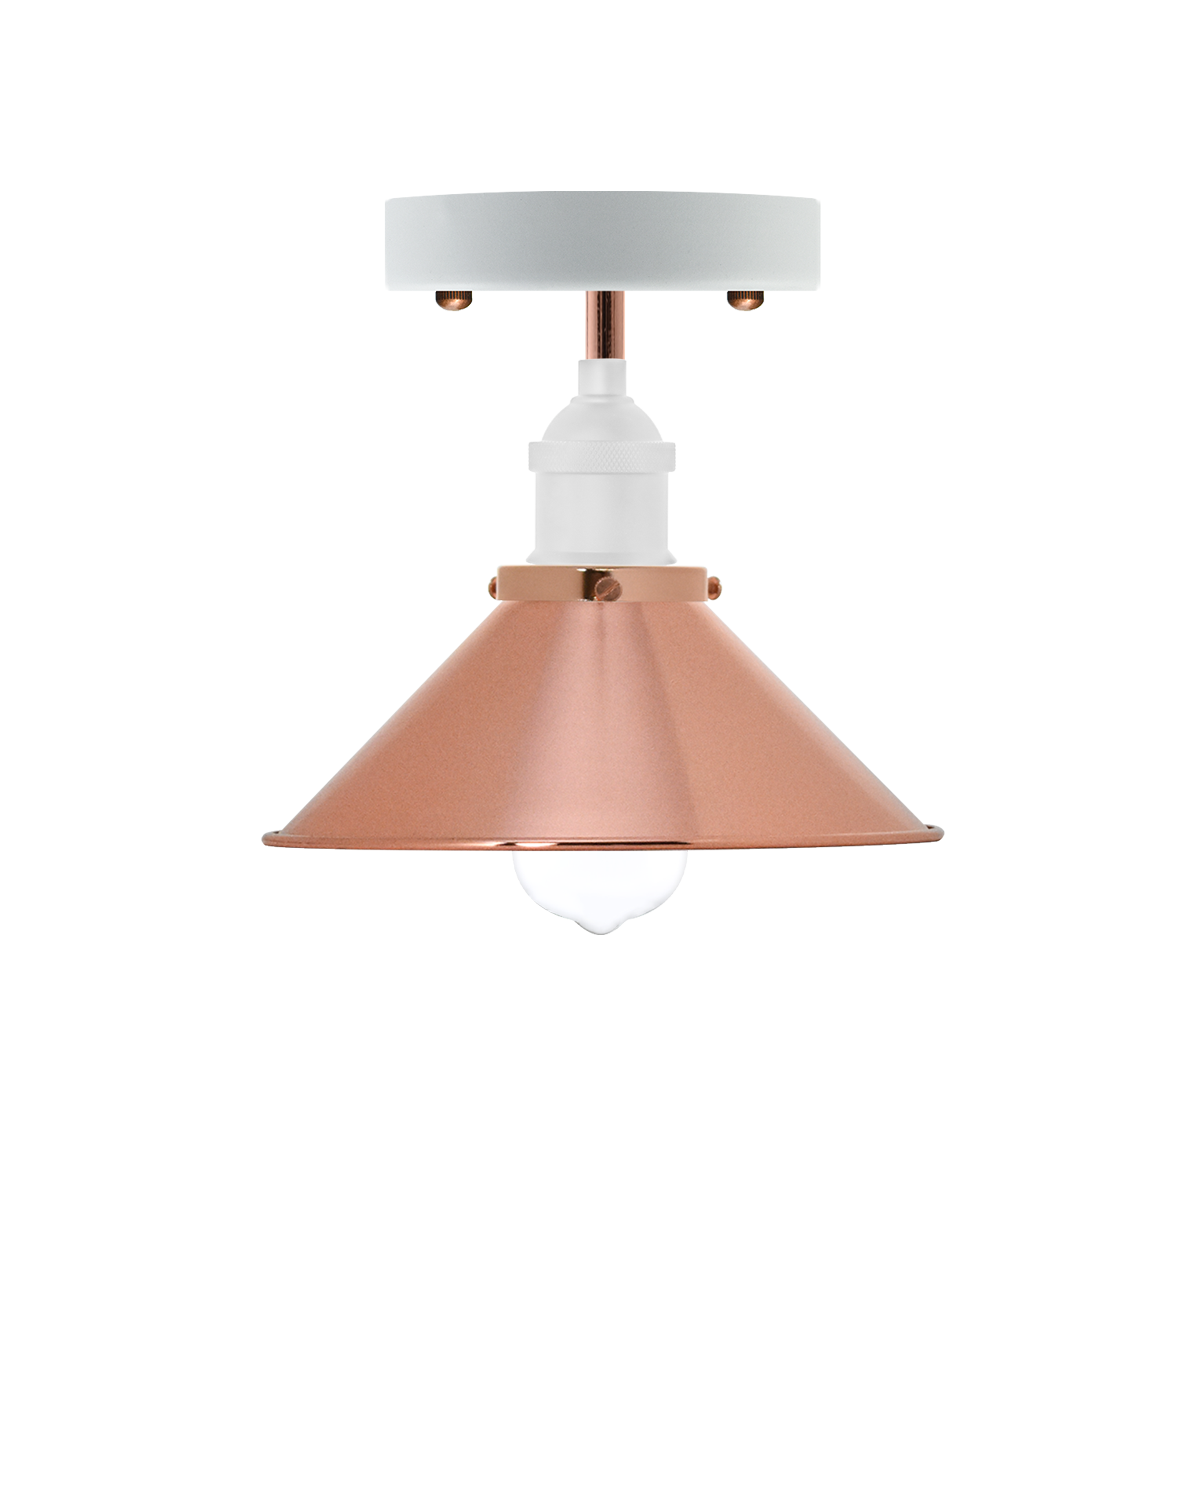 Semi-flush mount light fixture with a white base, copper metal shade, and an exposed bulb.